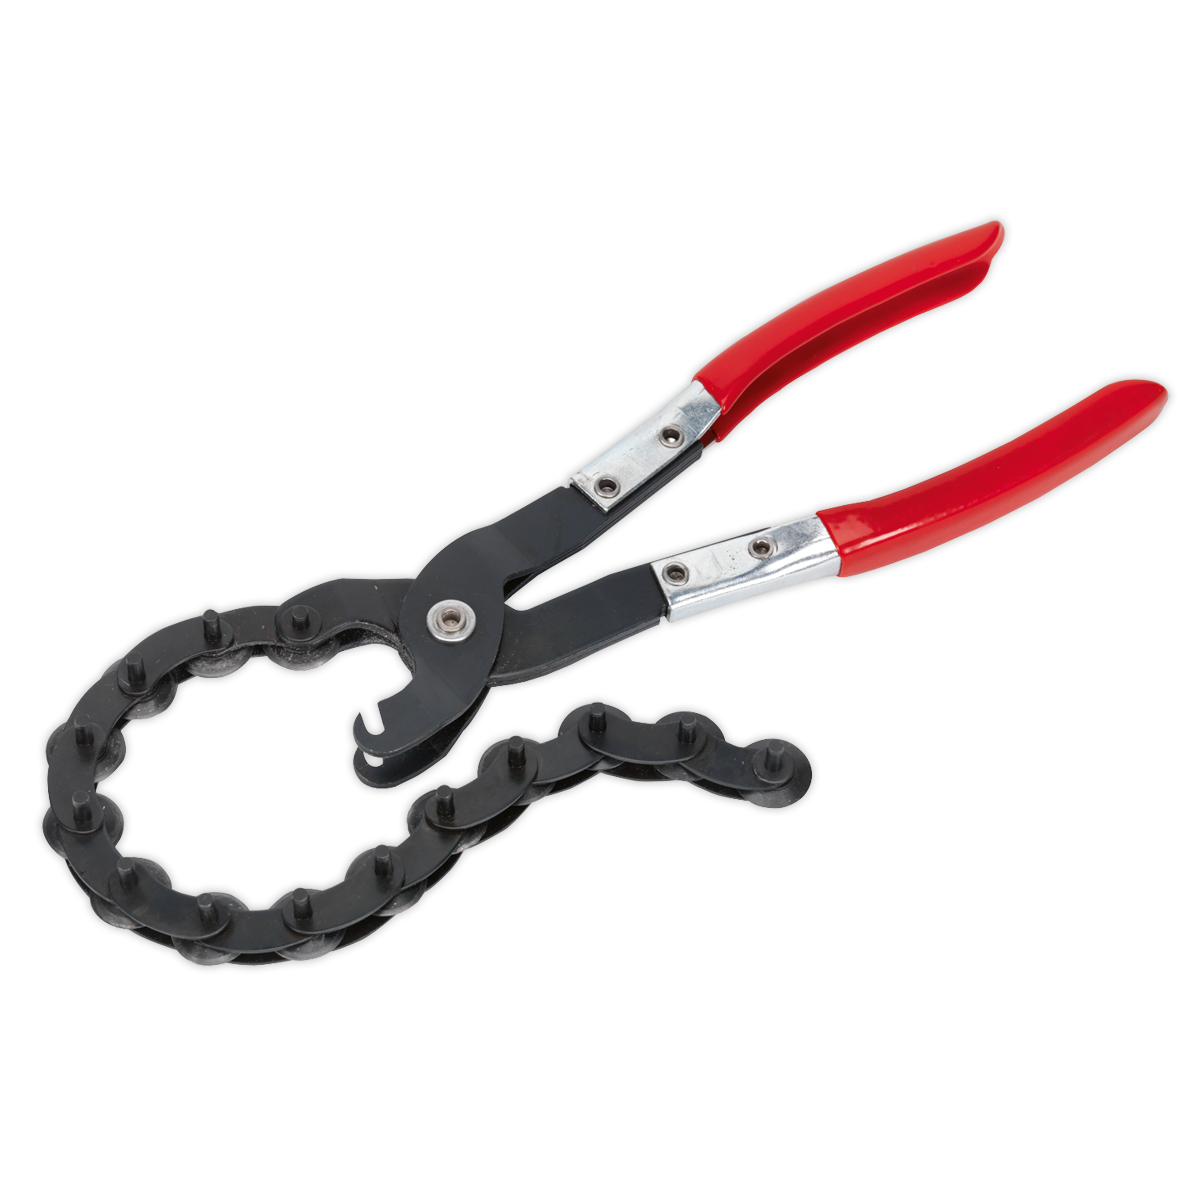 Exhaust Pipe Cutter Pliers - VS16372 - Farming Parts